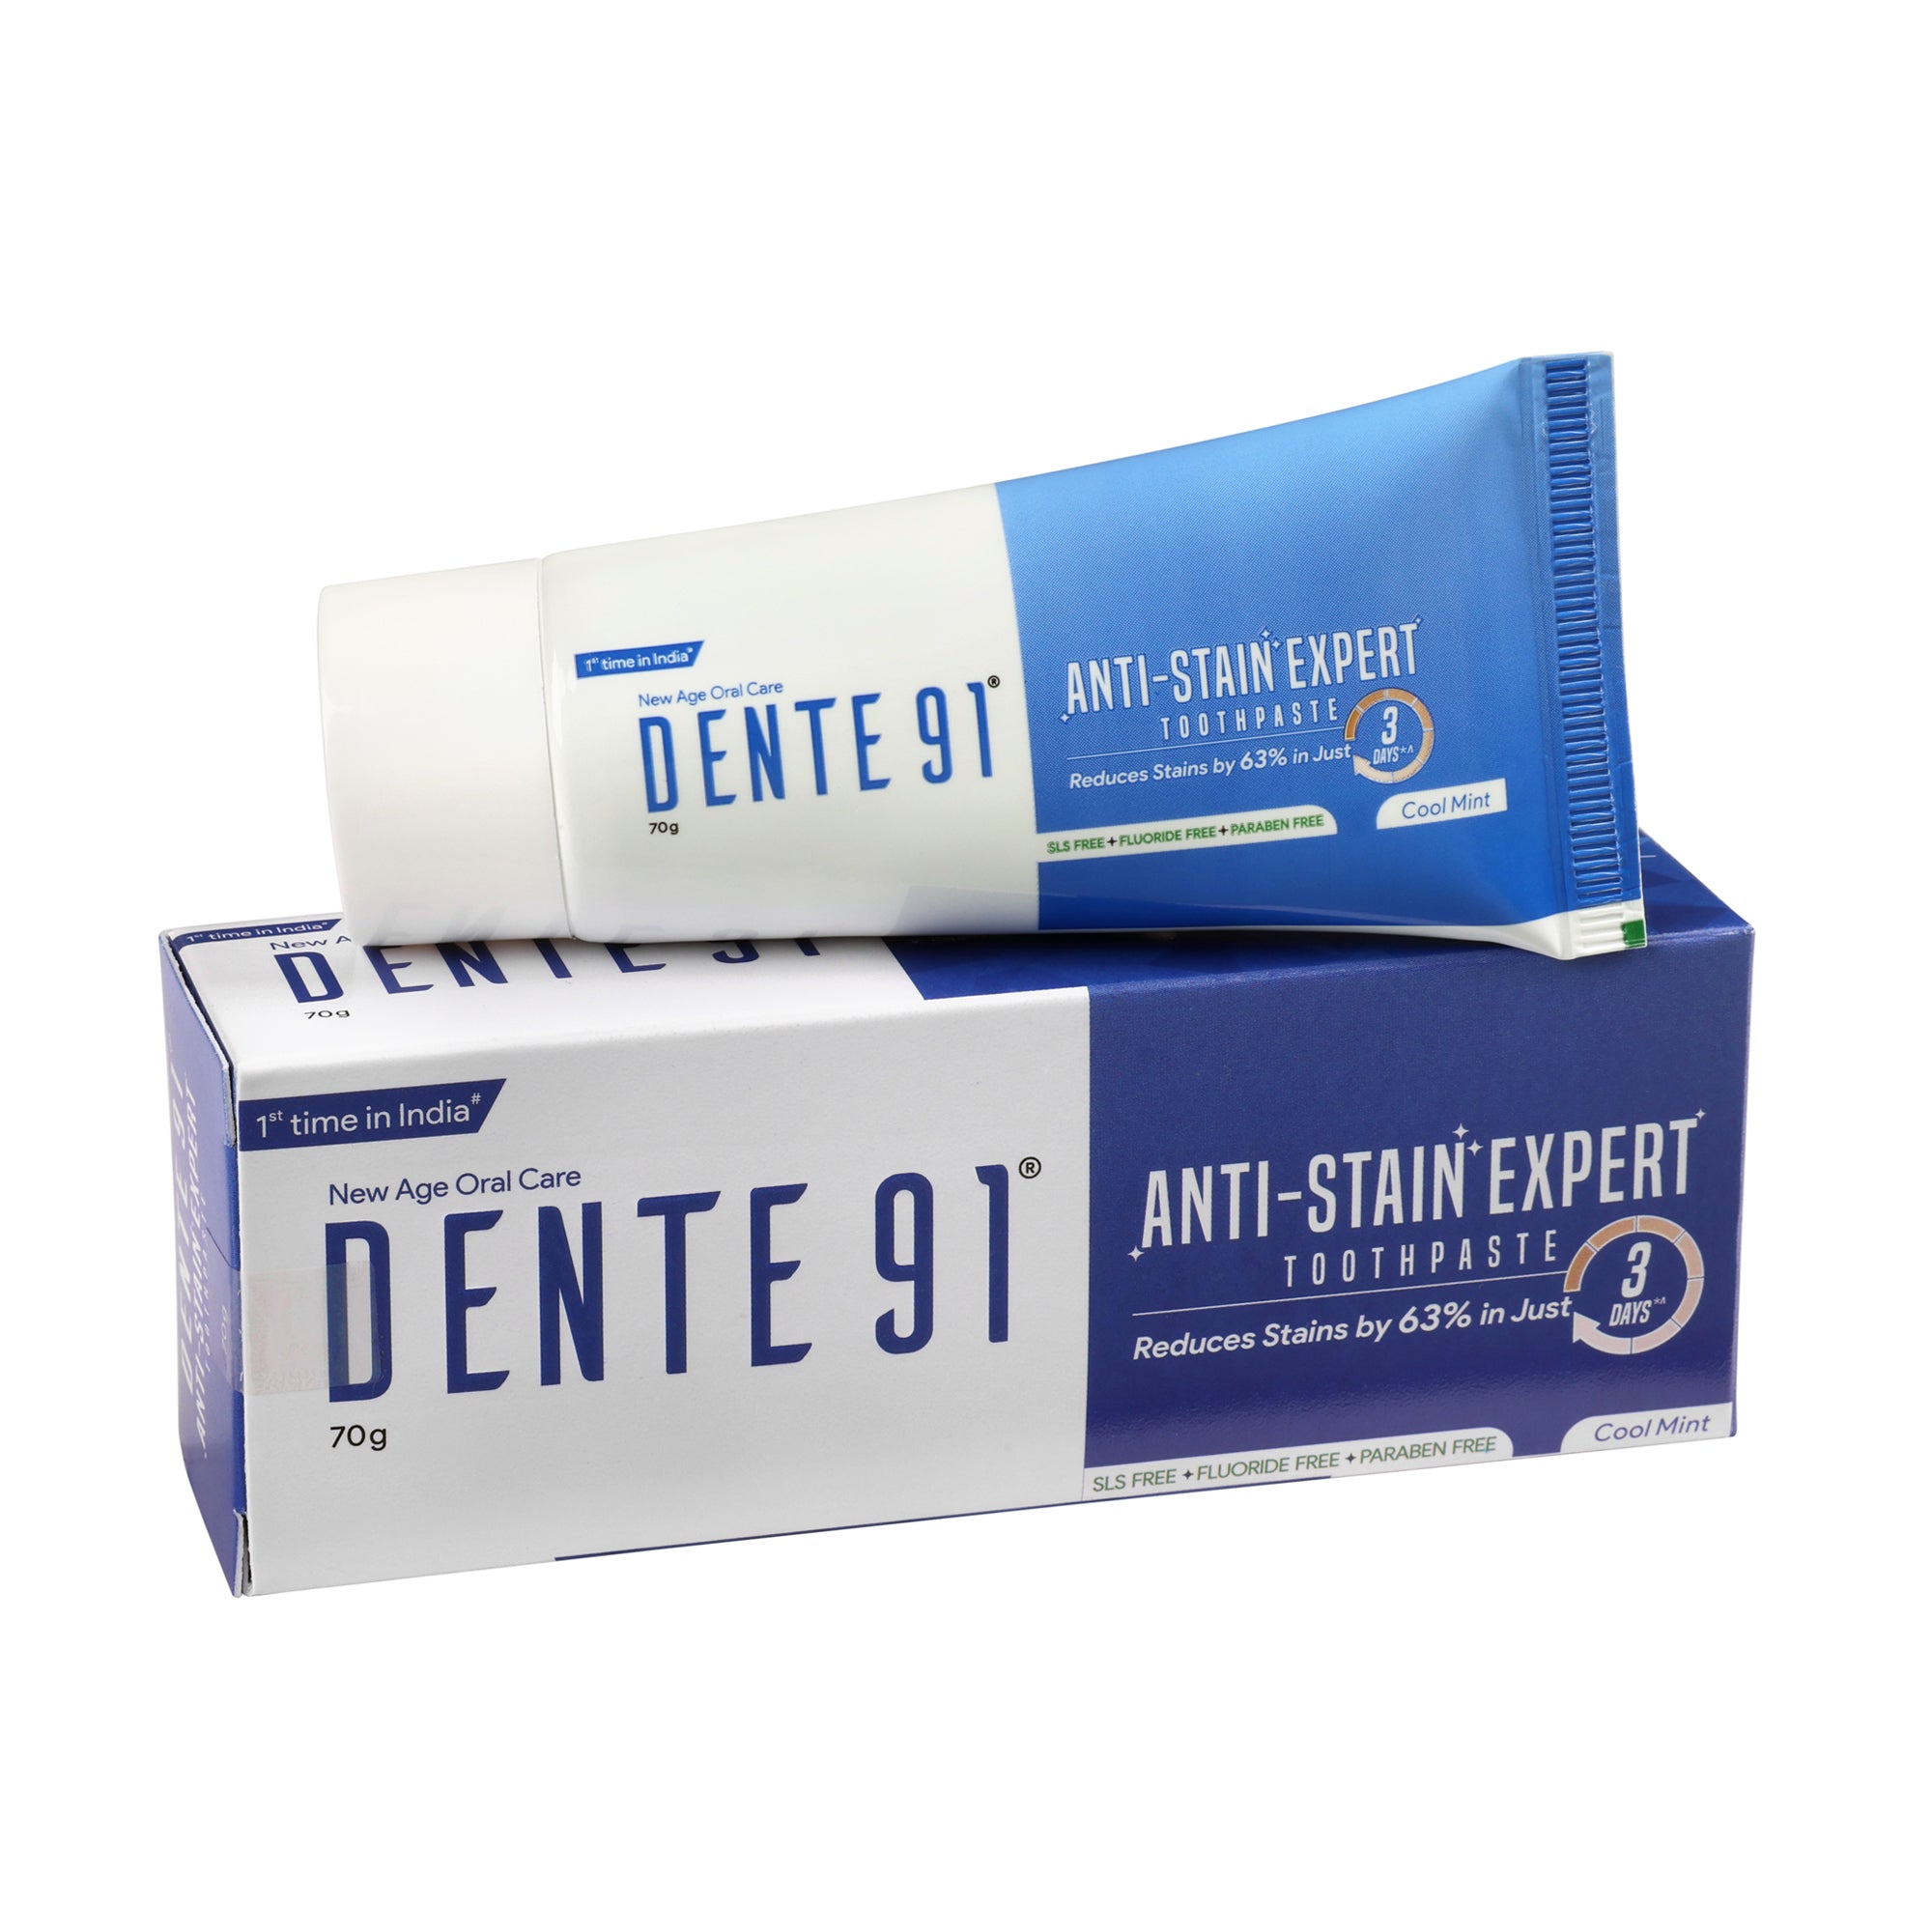 Dente91 Anti-Stain Expert Toothpaste for Stain Removal & Teeth Whitening, Protects against Dental Caries & Strengthens Enamel, Reduces 63% stains in just 3 days, 70g, Pack of 1